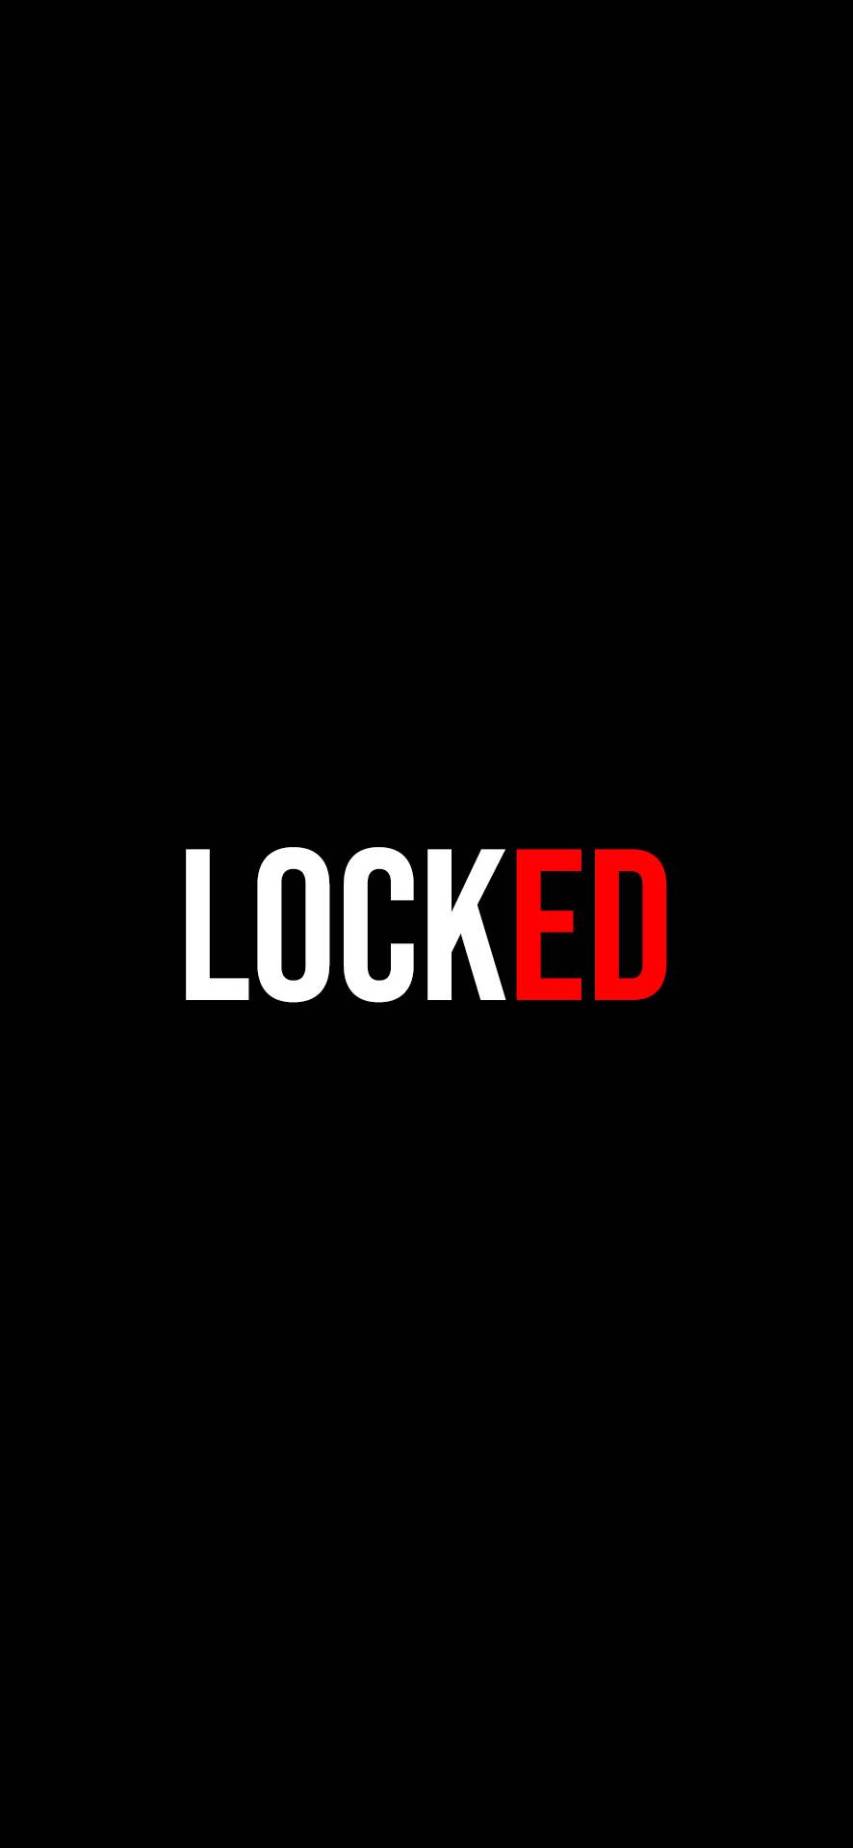 Locked Red Screen image Wallpapers for iPhone